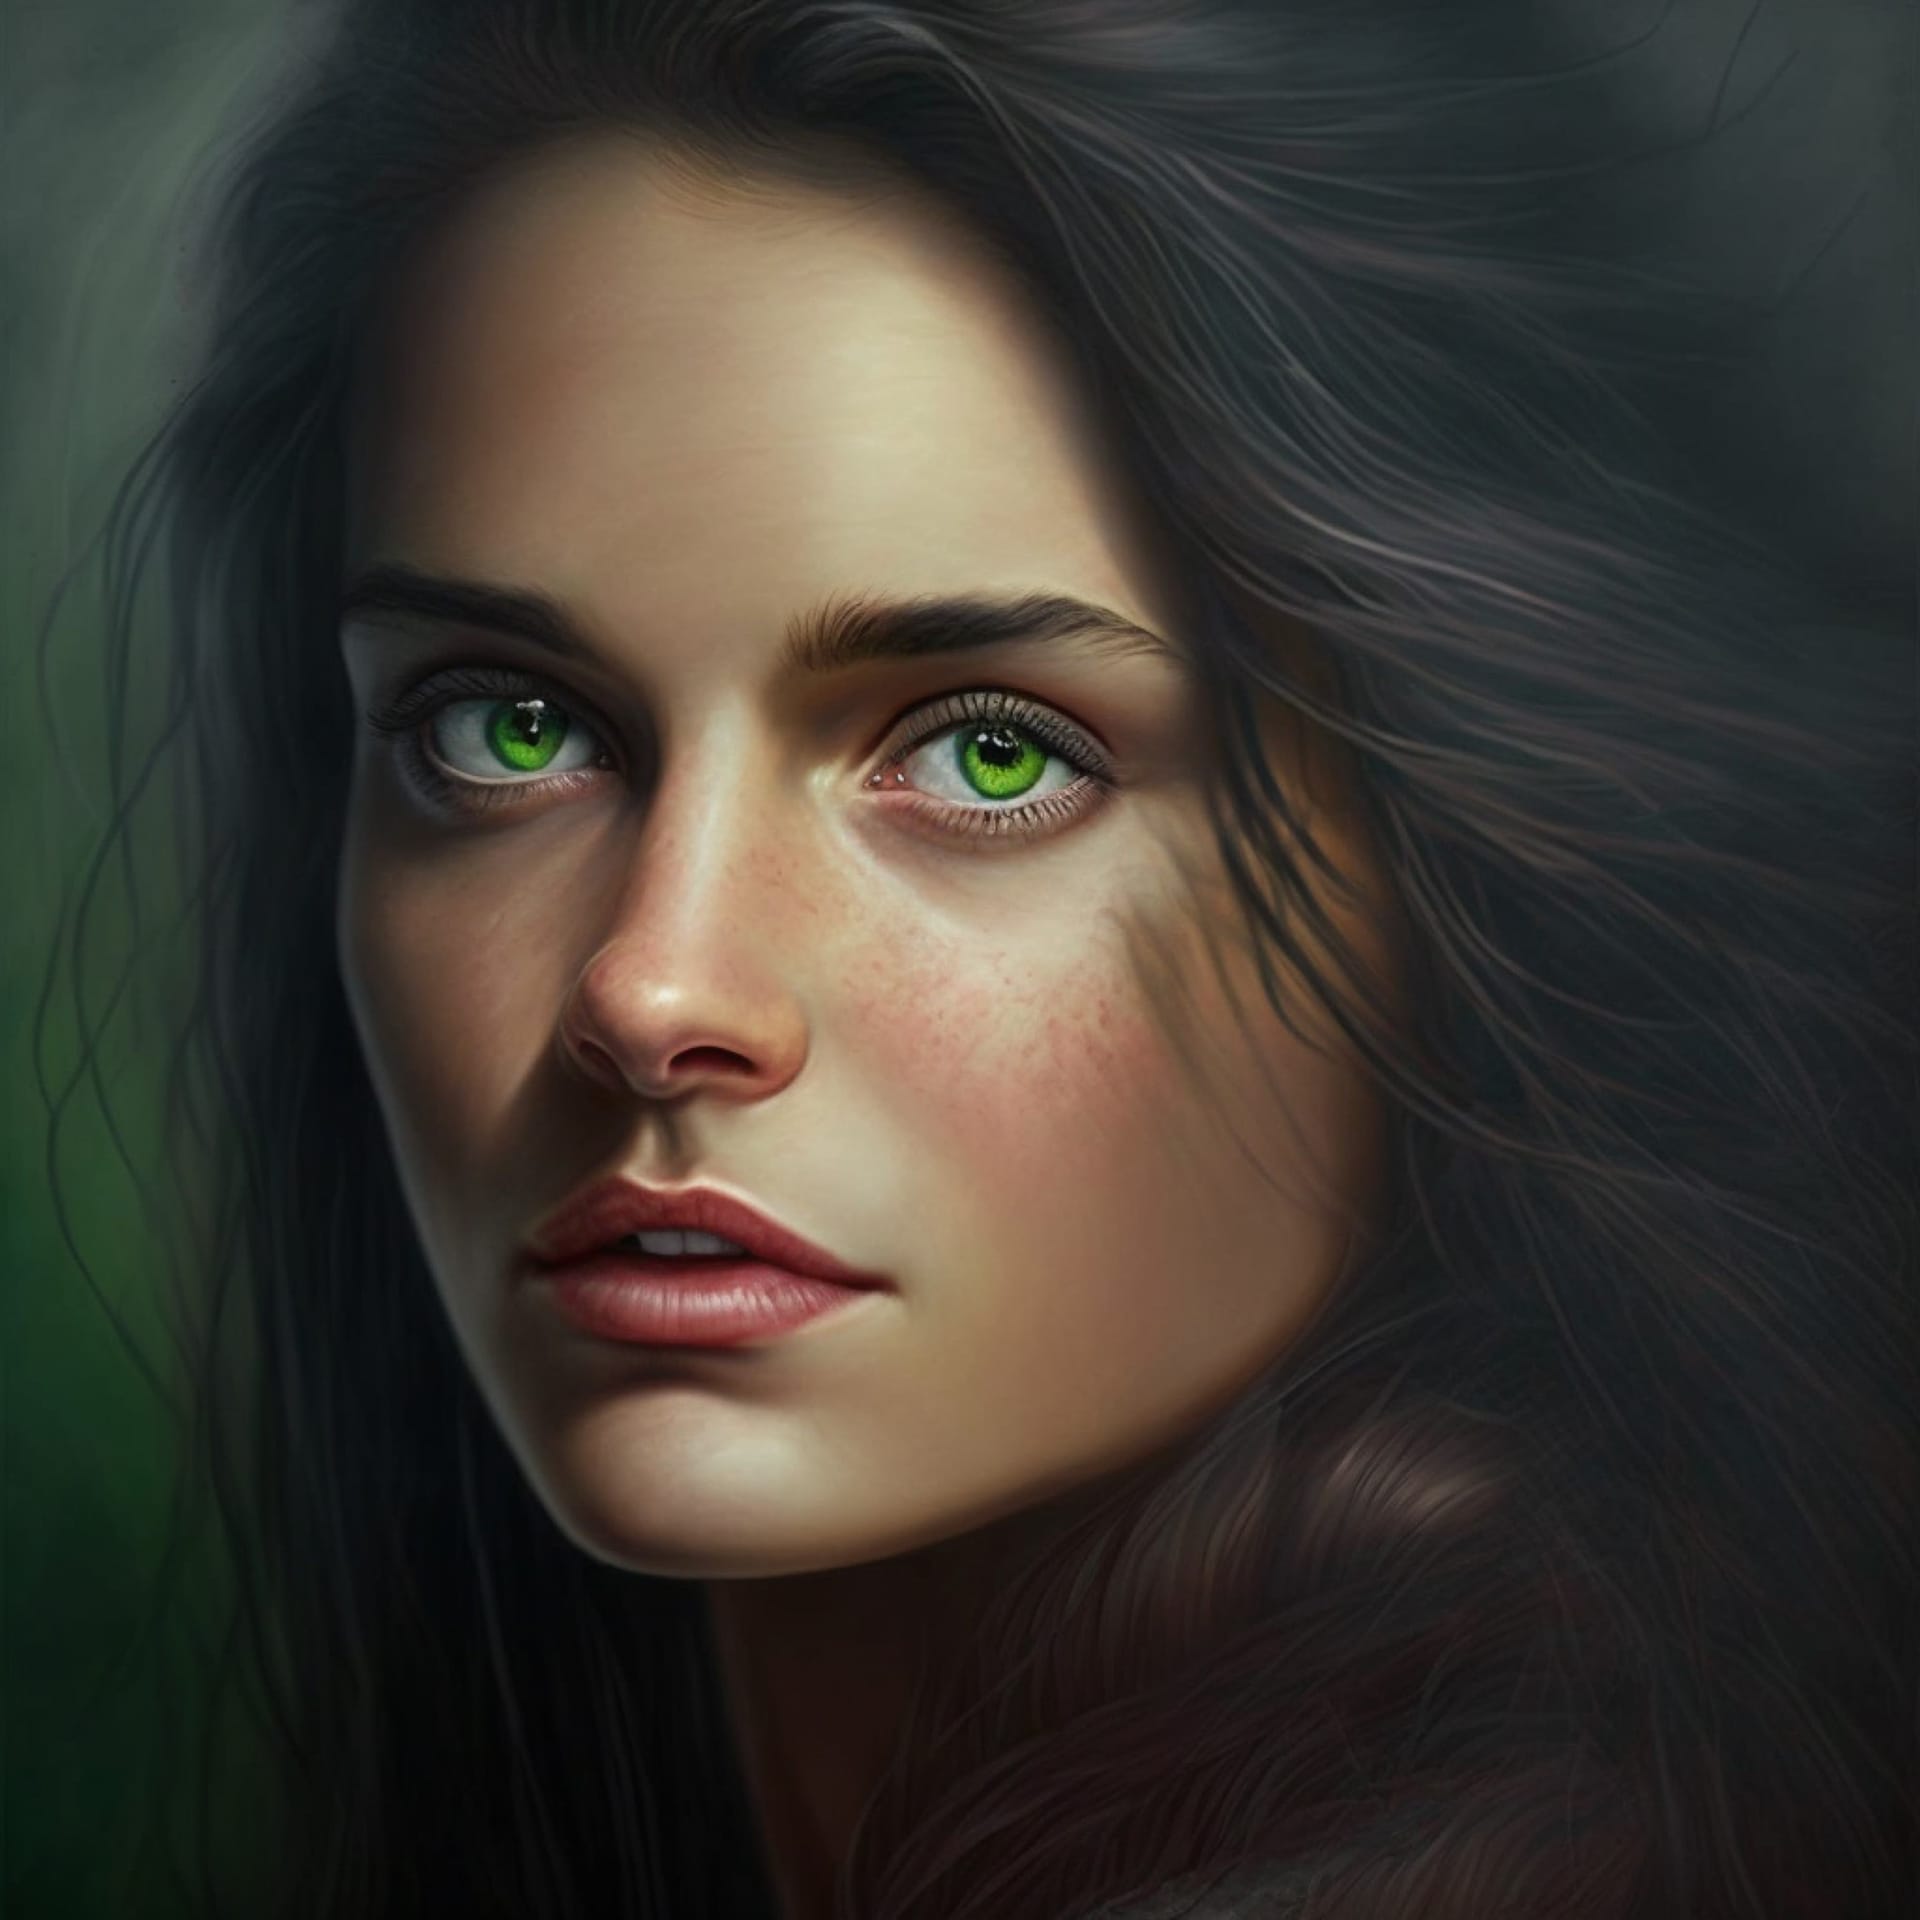 Girly profile pictures green eyes image